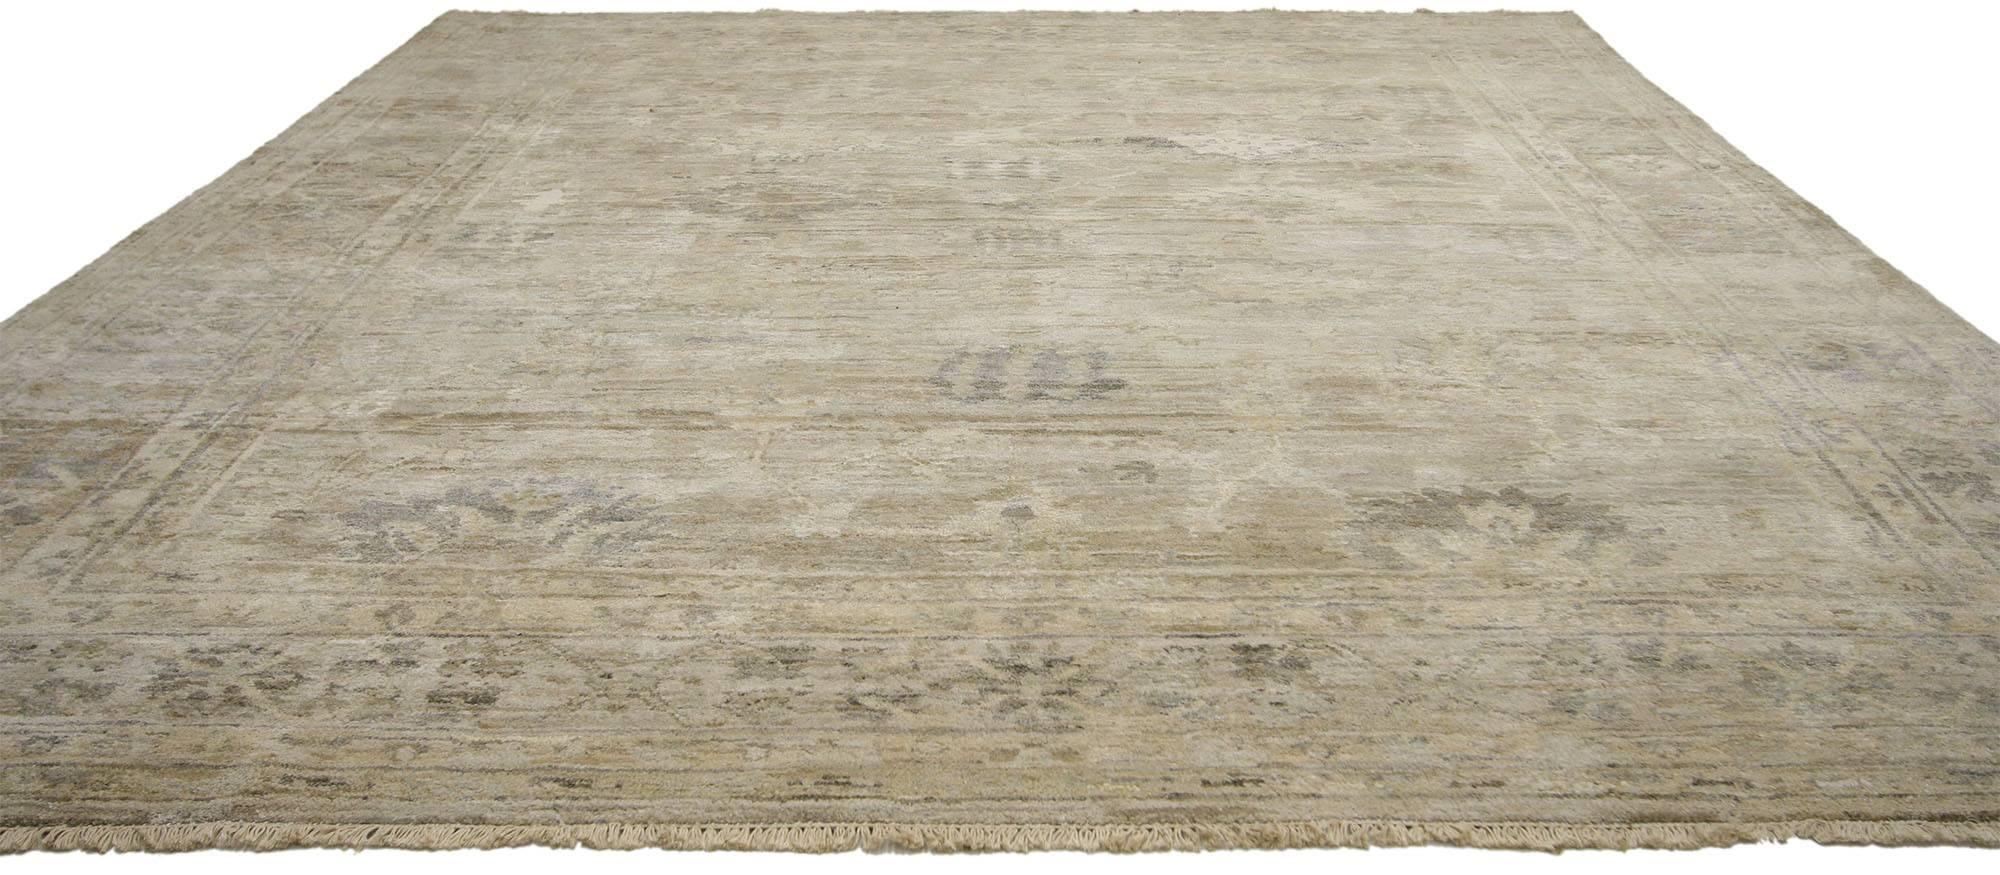 30365 New Contemporary Oushak Design Rug with Transitional Style.  With its soft, subtle hues and cozy simplicity, this hand-knotted wool and silk Oushak design rug displays a transitional style. The field is covered in an all-over botanical pattern